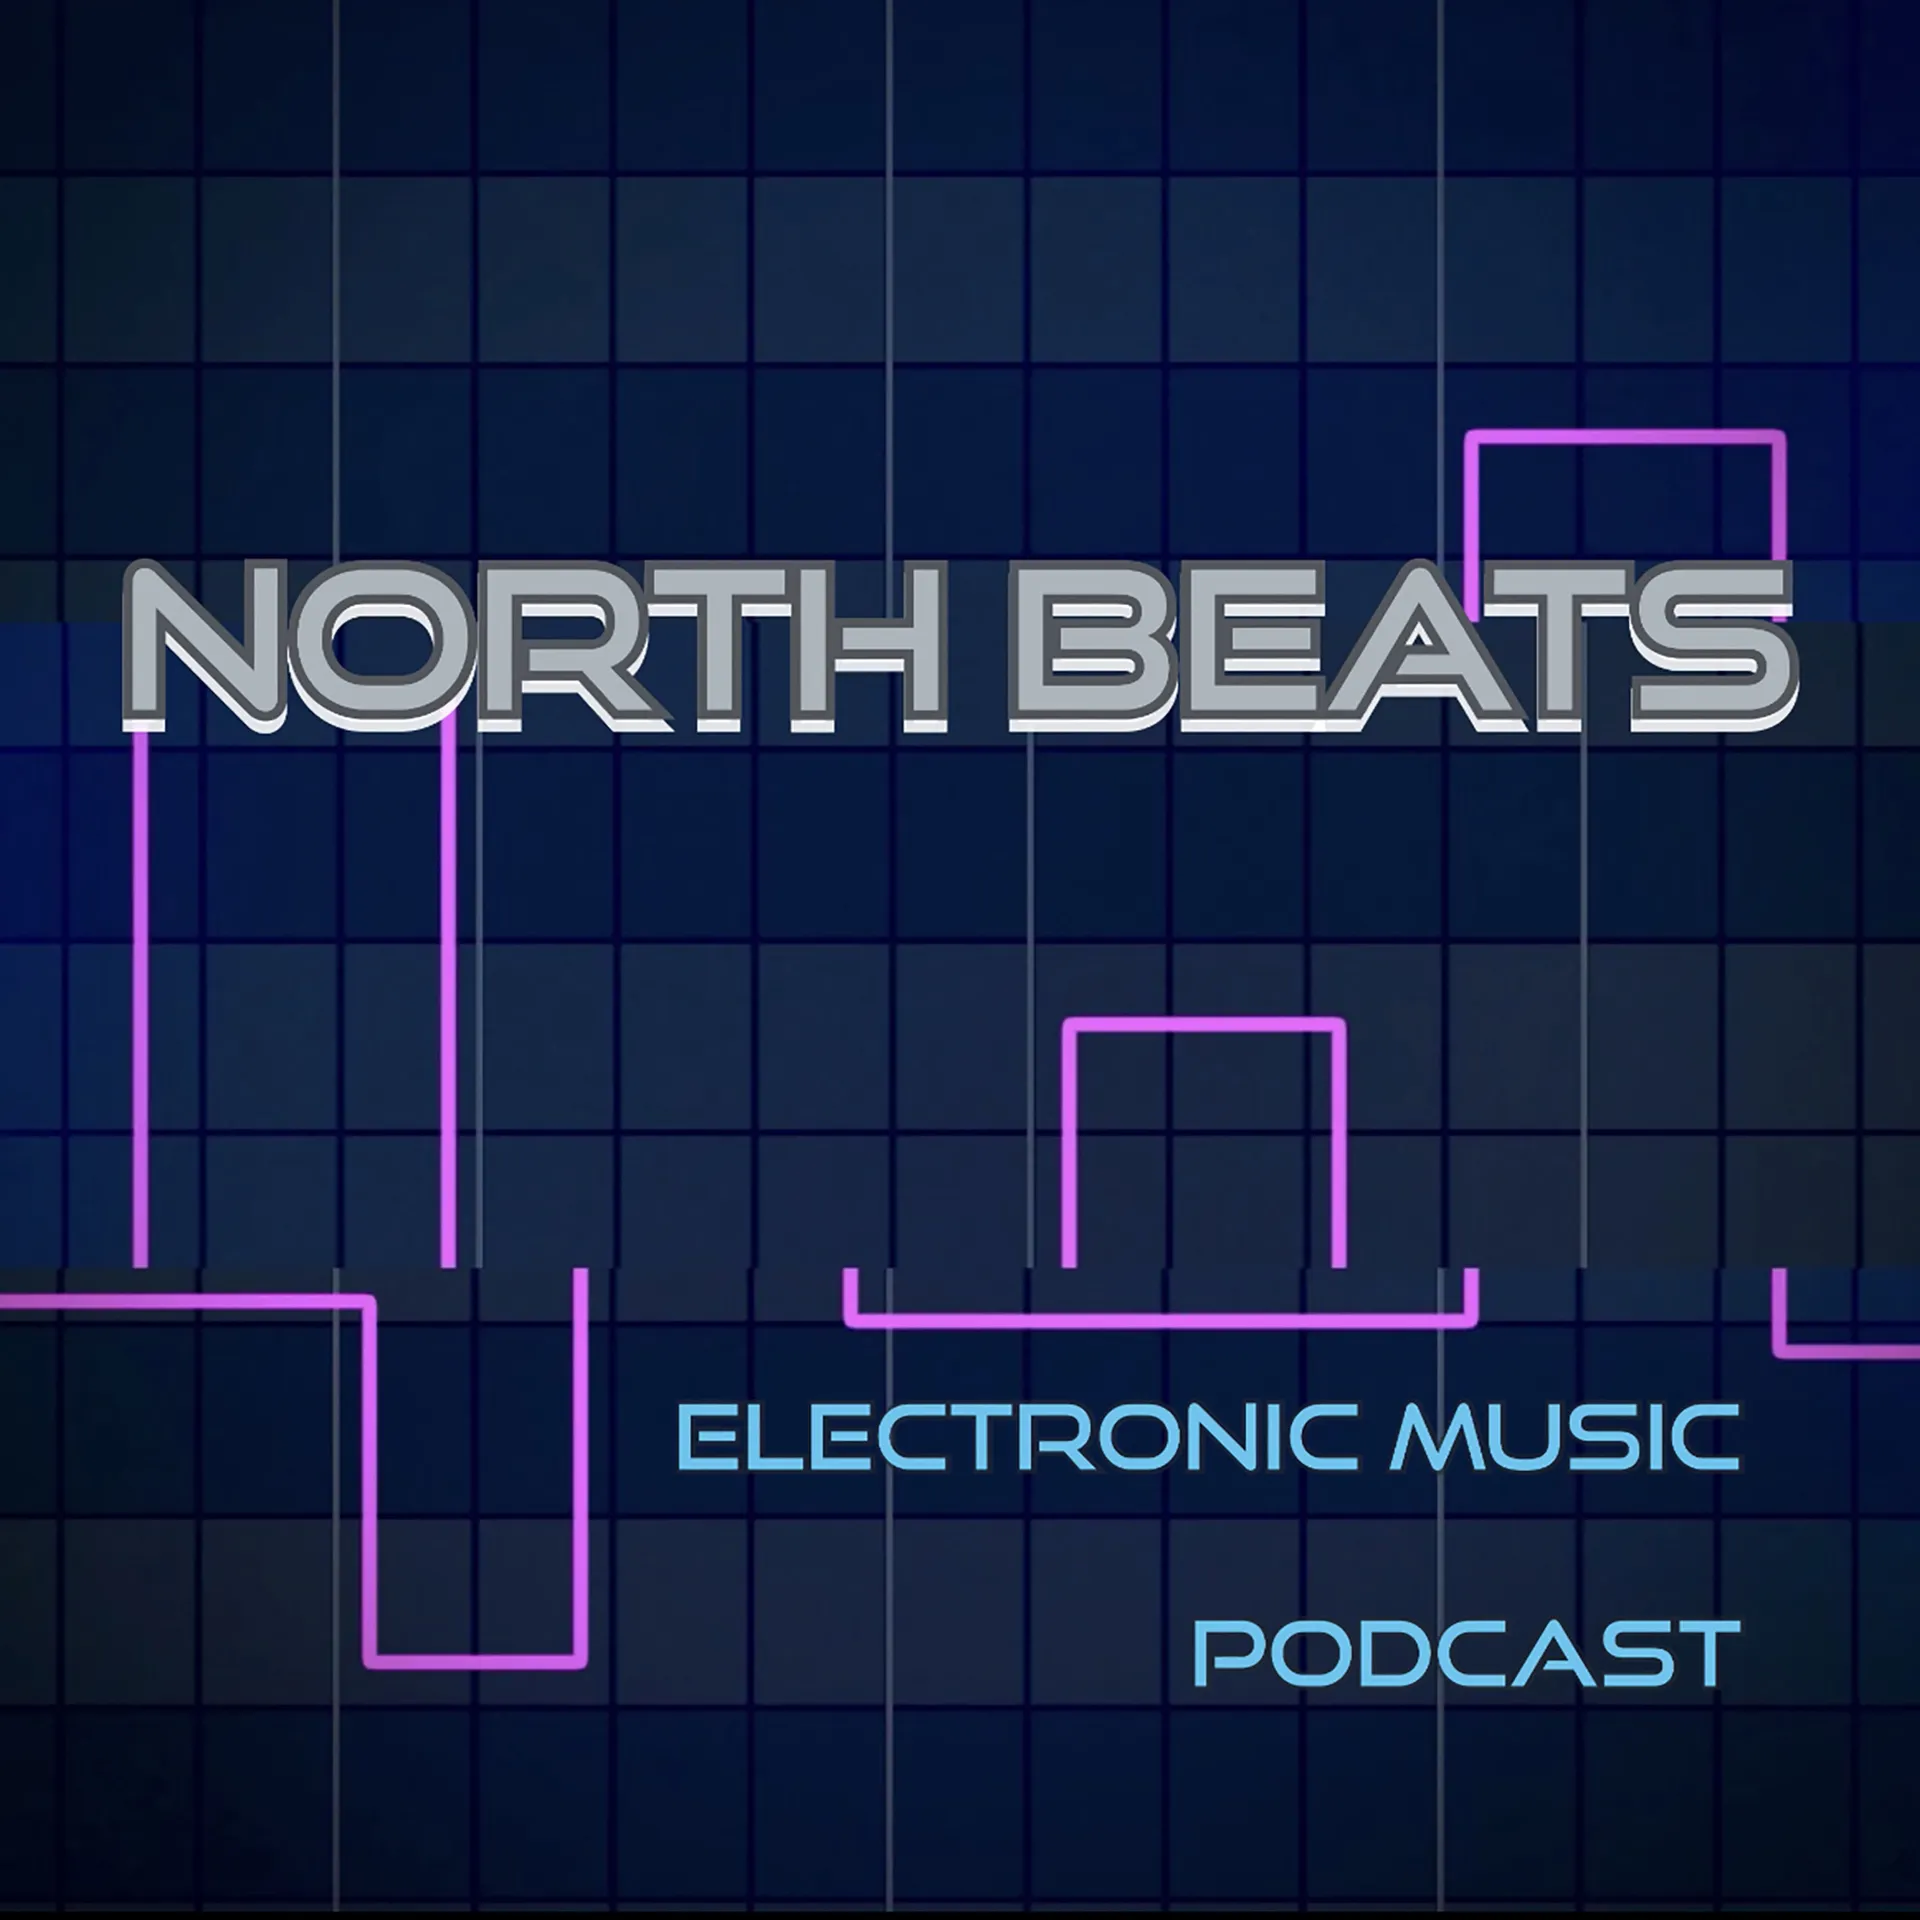 Richard Hogben interview on North Beats podcast